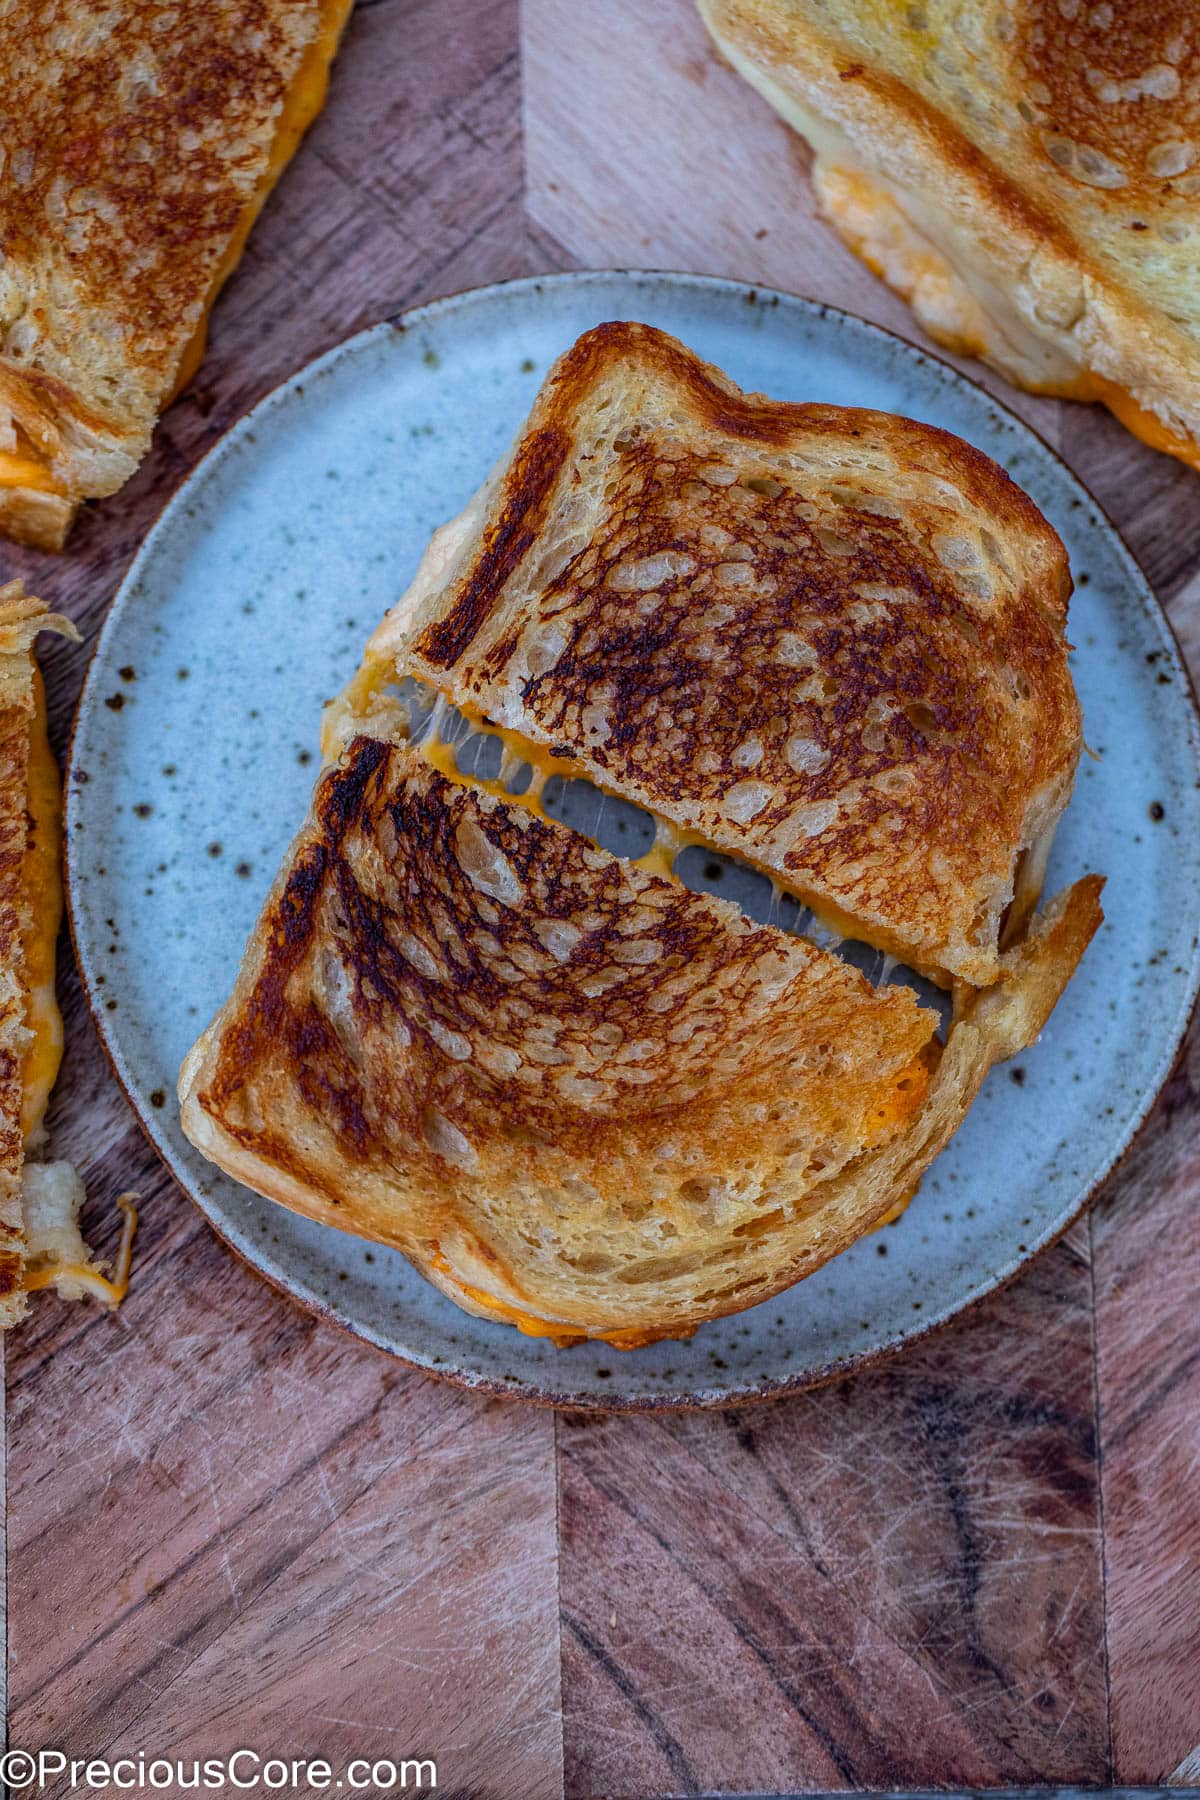 Grilled cheese cut in half on a plate.